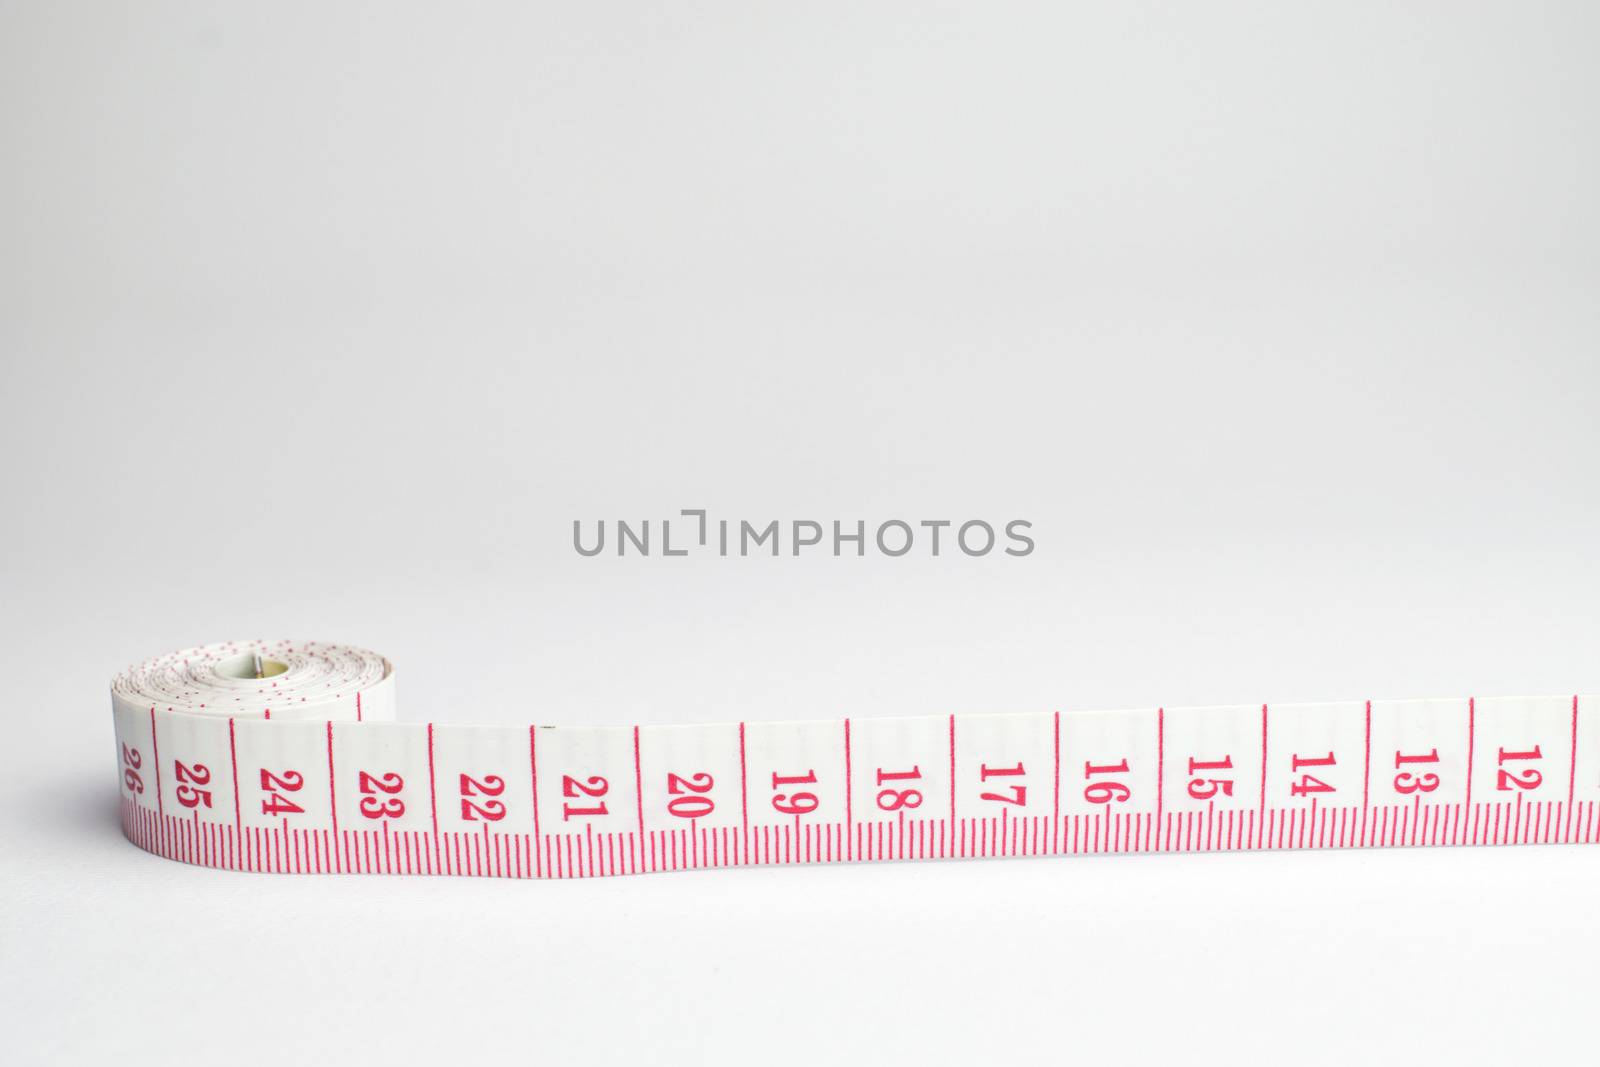 An image of a rolled tape measure on a white background